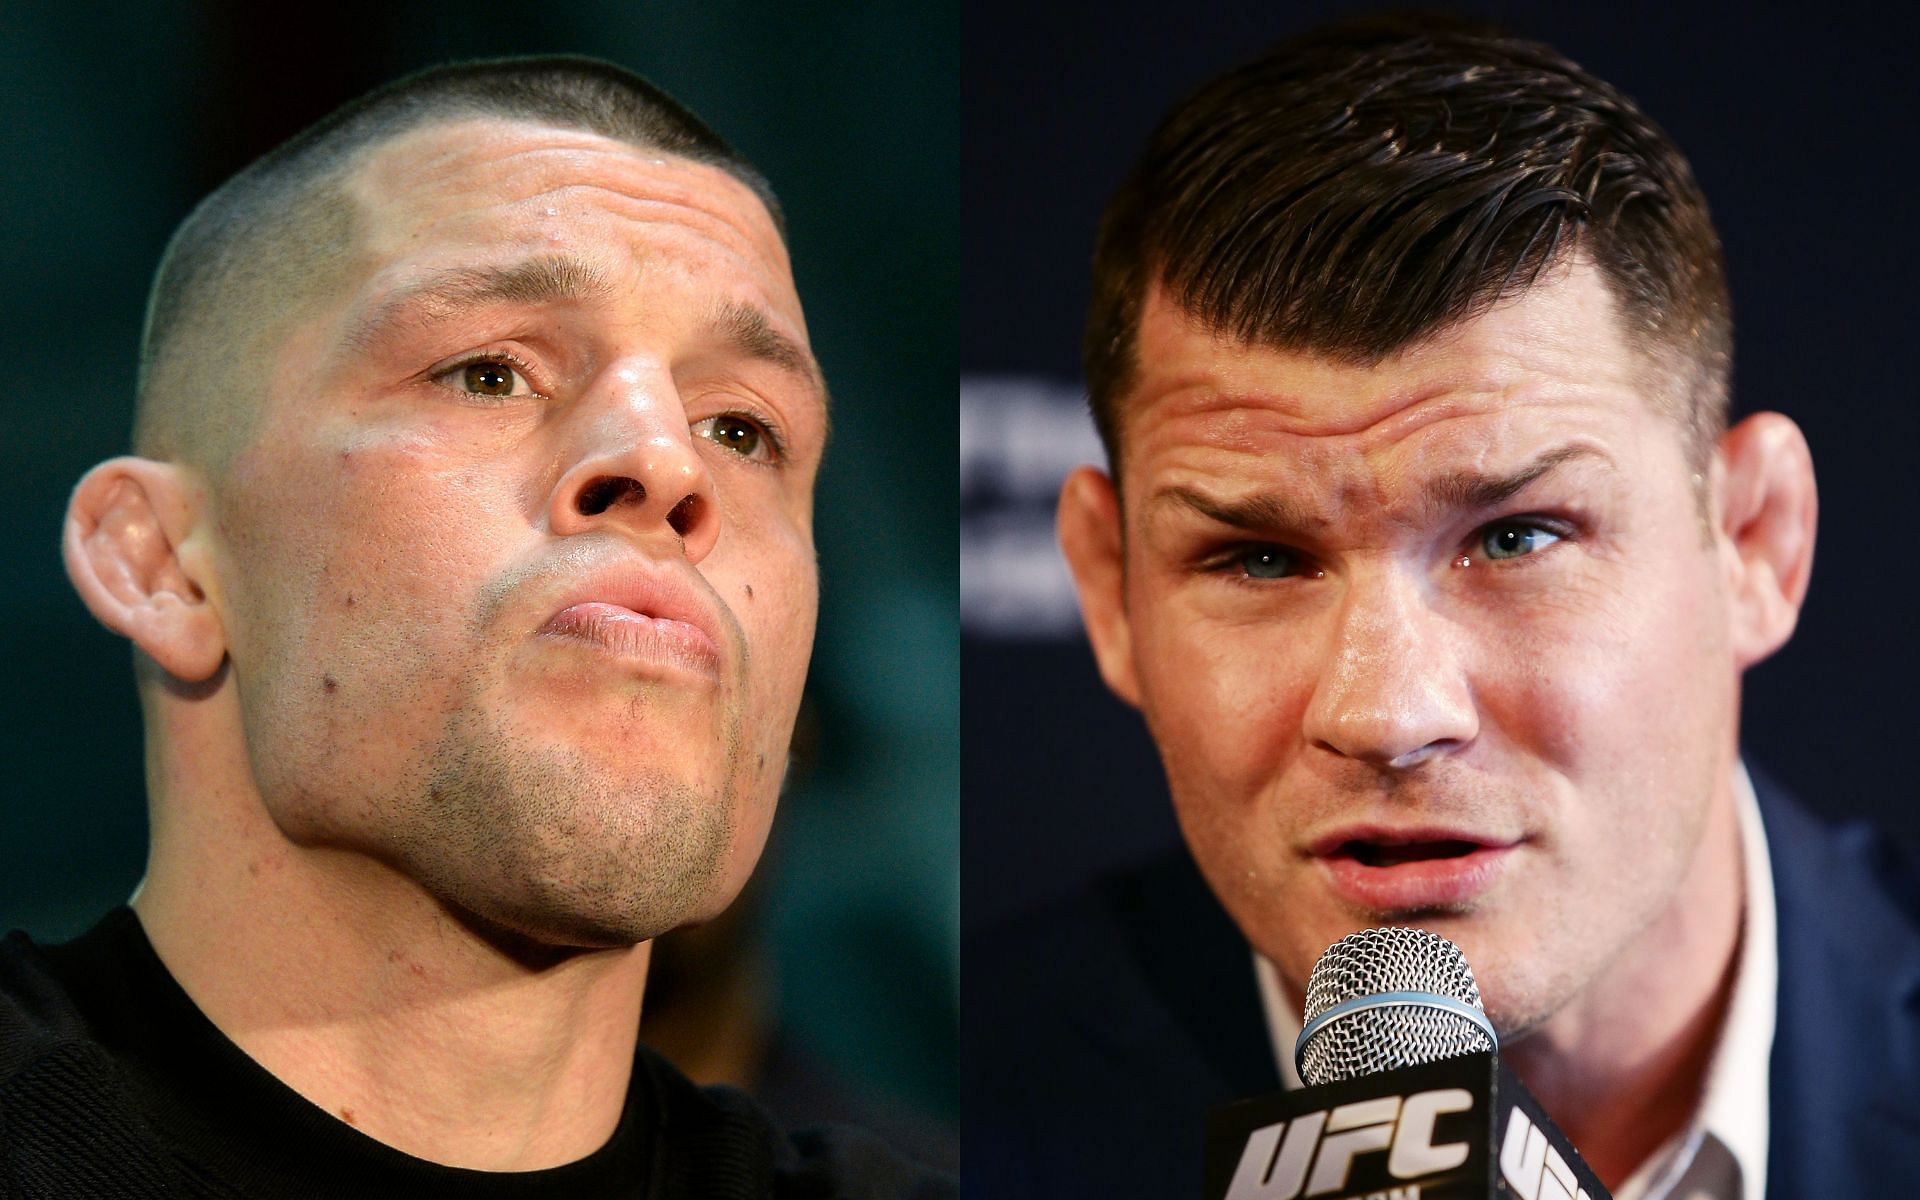 Fan favorite UFC fighter Nate Diaz (left) and the legendary Michael Bisping (right)